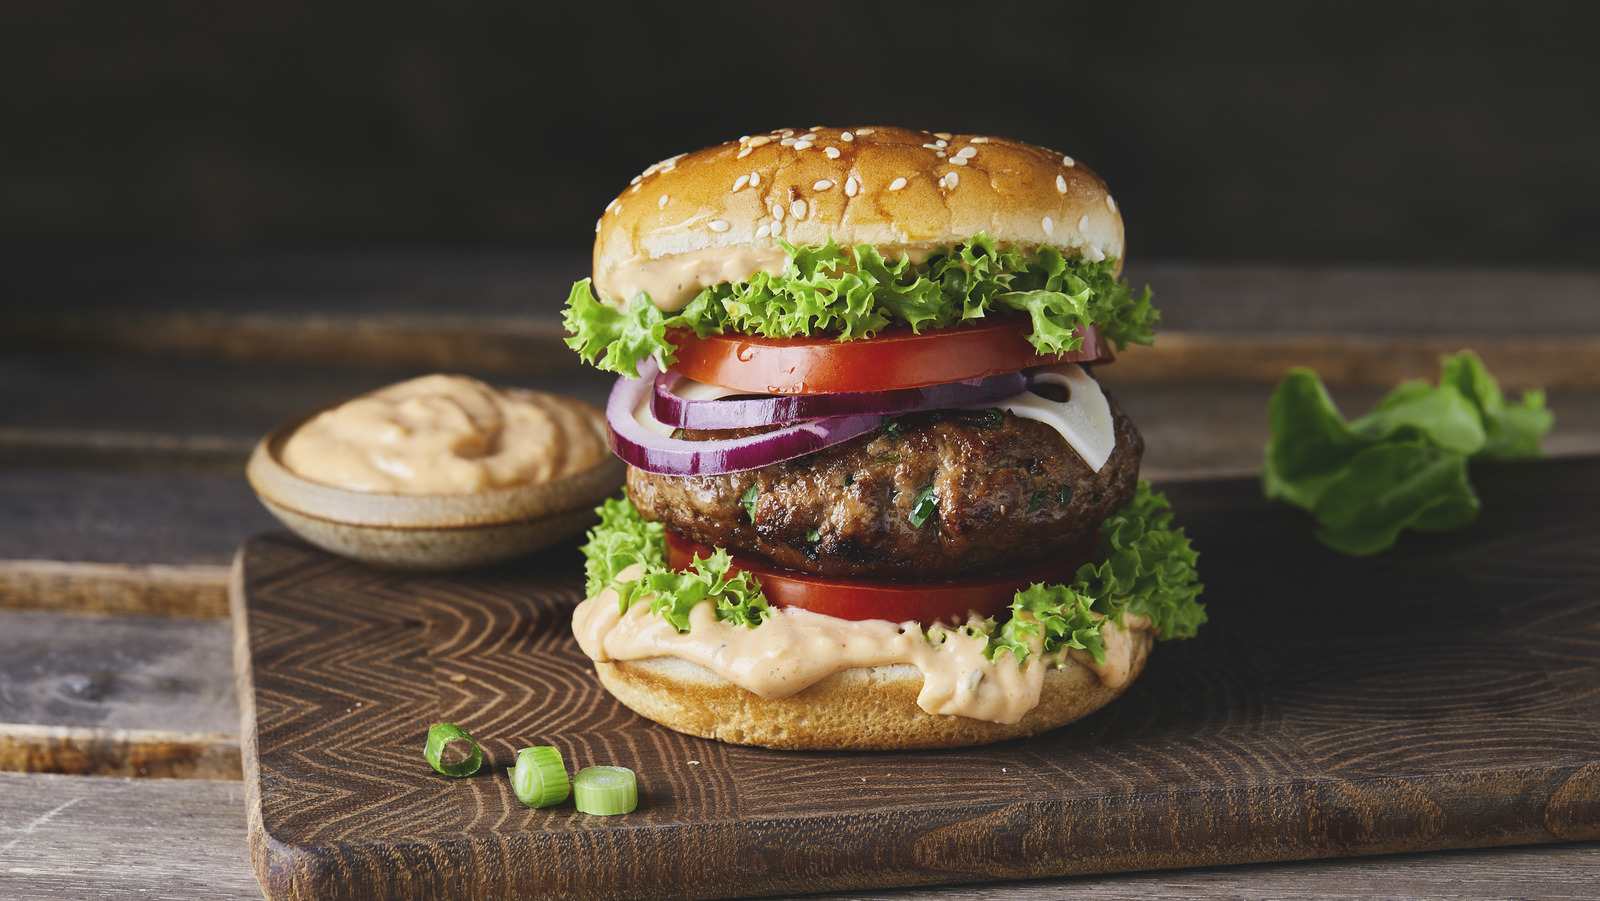 Grass-Fed Beef Vs Grain-Fed: What Makes The Better Burger?